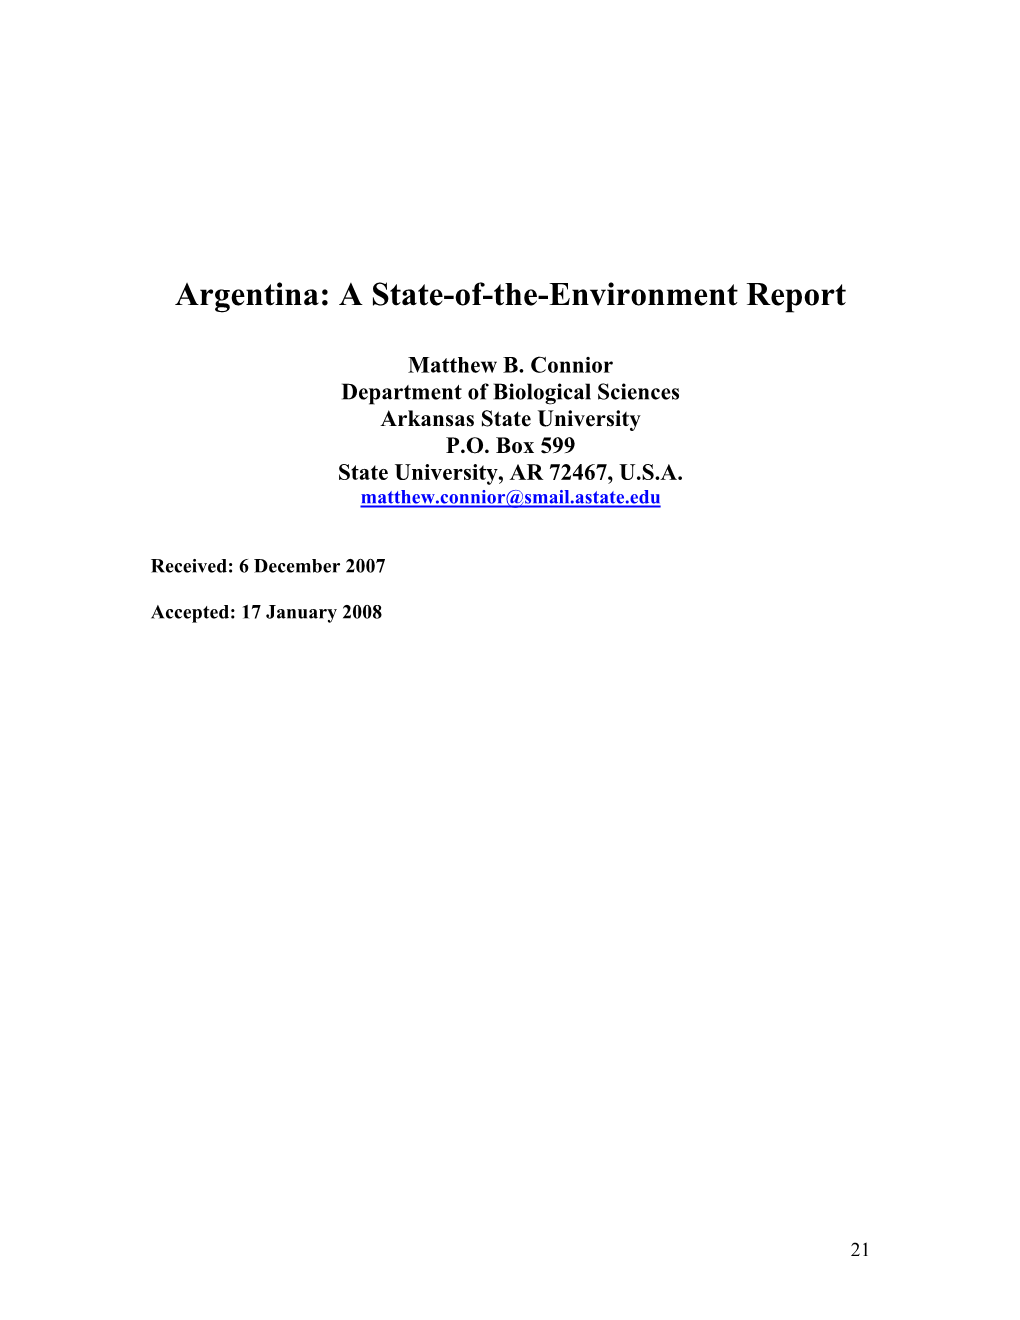 Argentina: a State-Of-The-Environment Report